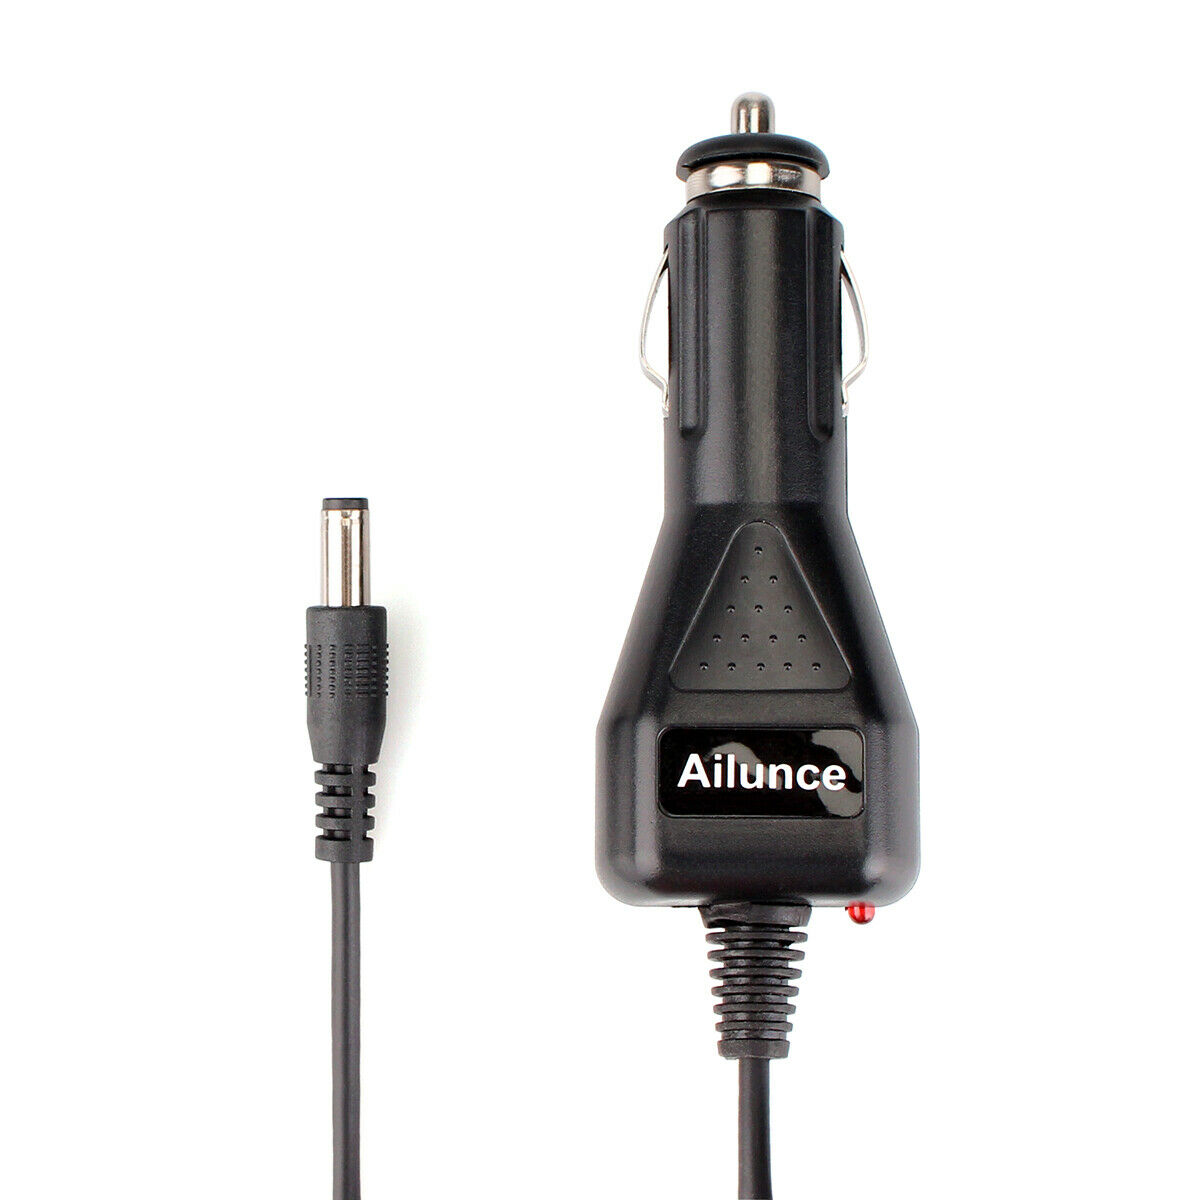 Ailunce HD1 Car Charger Cable with Cigarette Lighter Plug